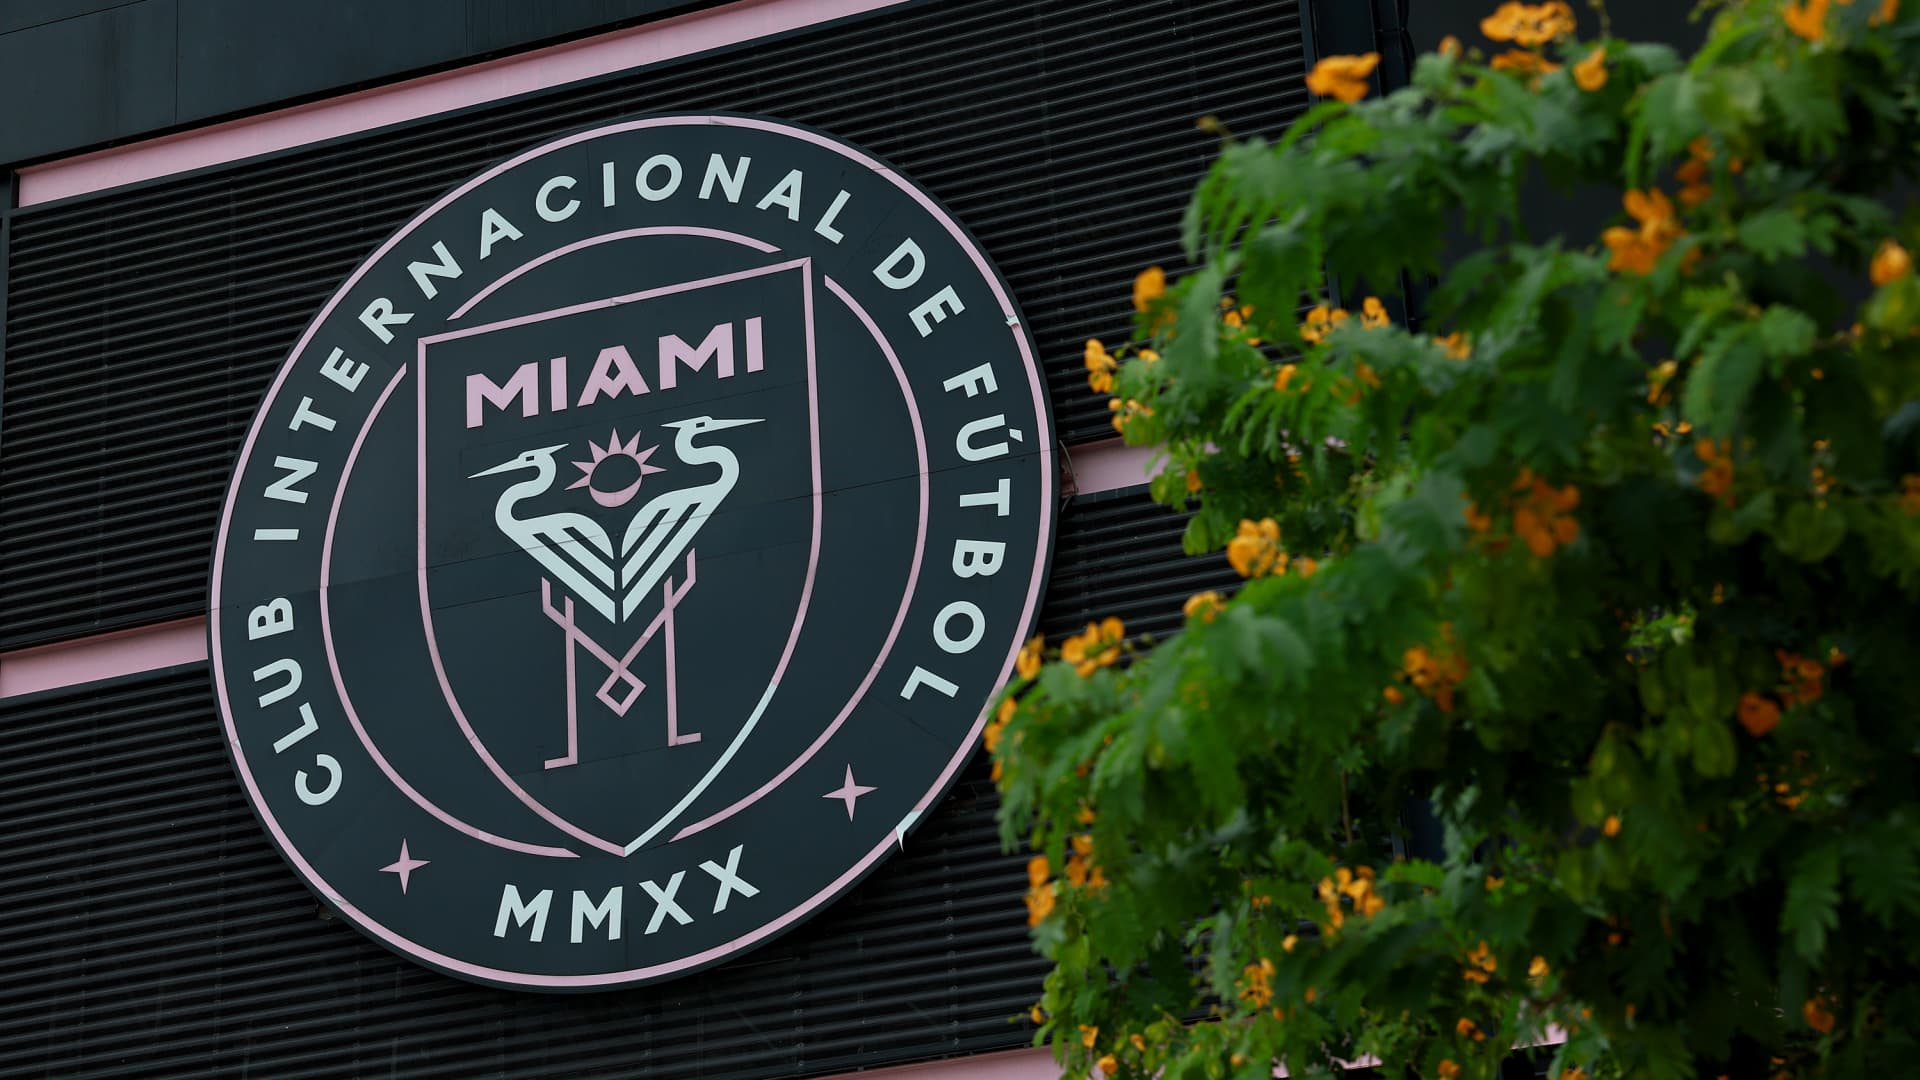 The DRV PNK stadium where the professional soccer team Inter Miami plays games on June 07, 2023 in Fort Lauderdale, Florida.